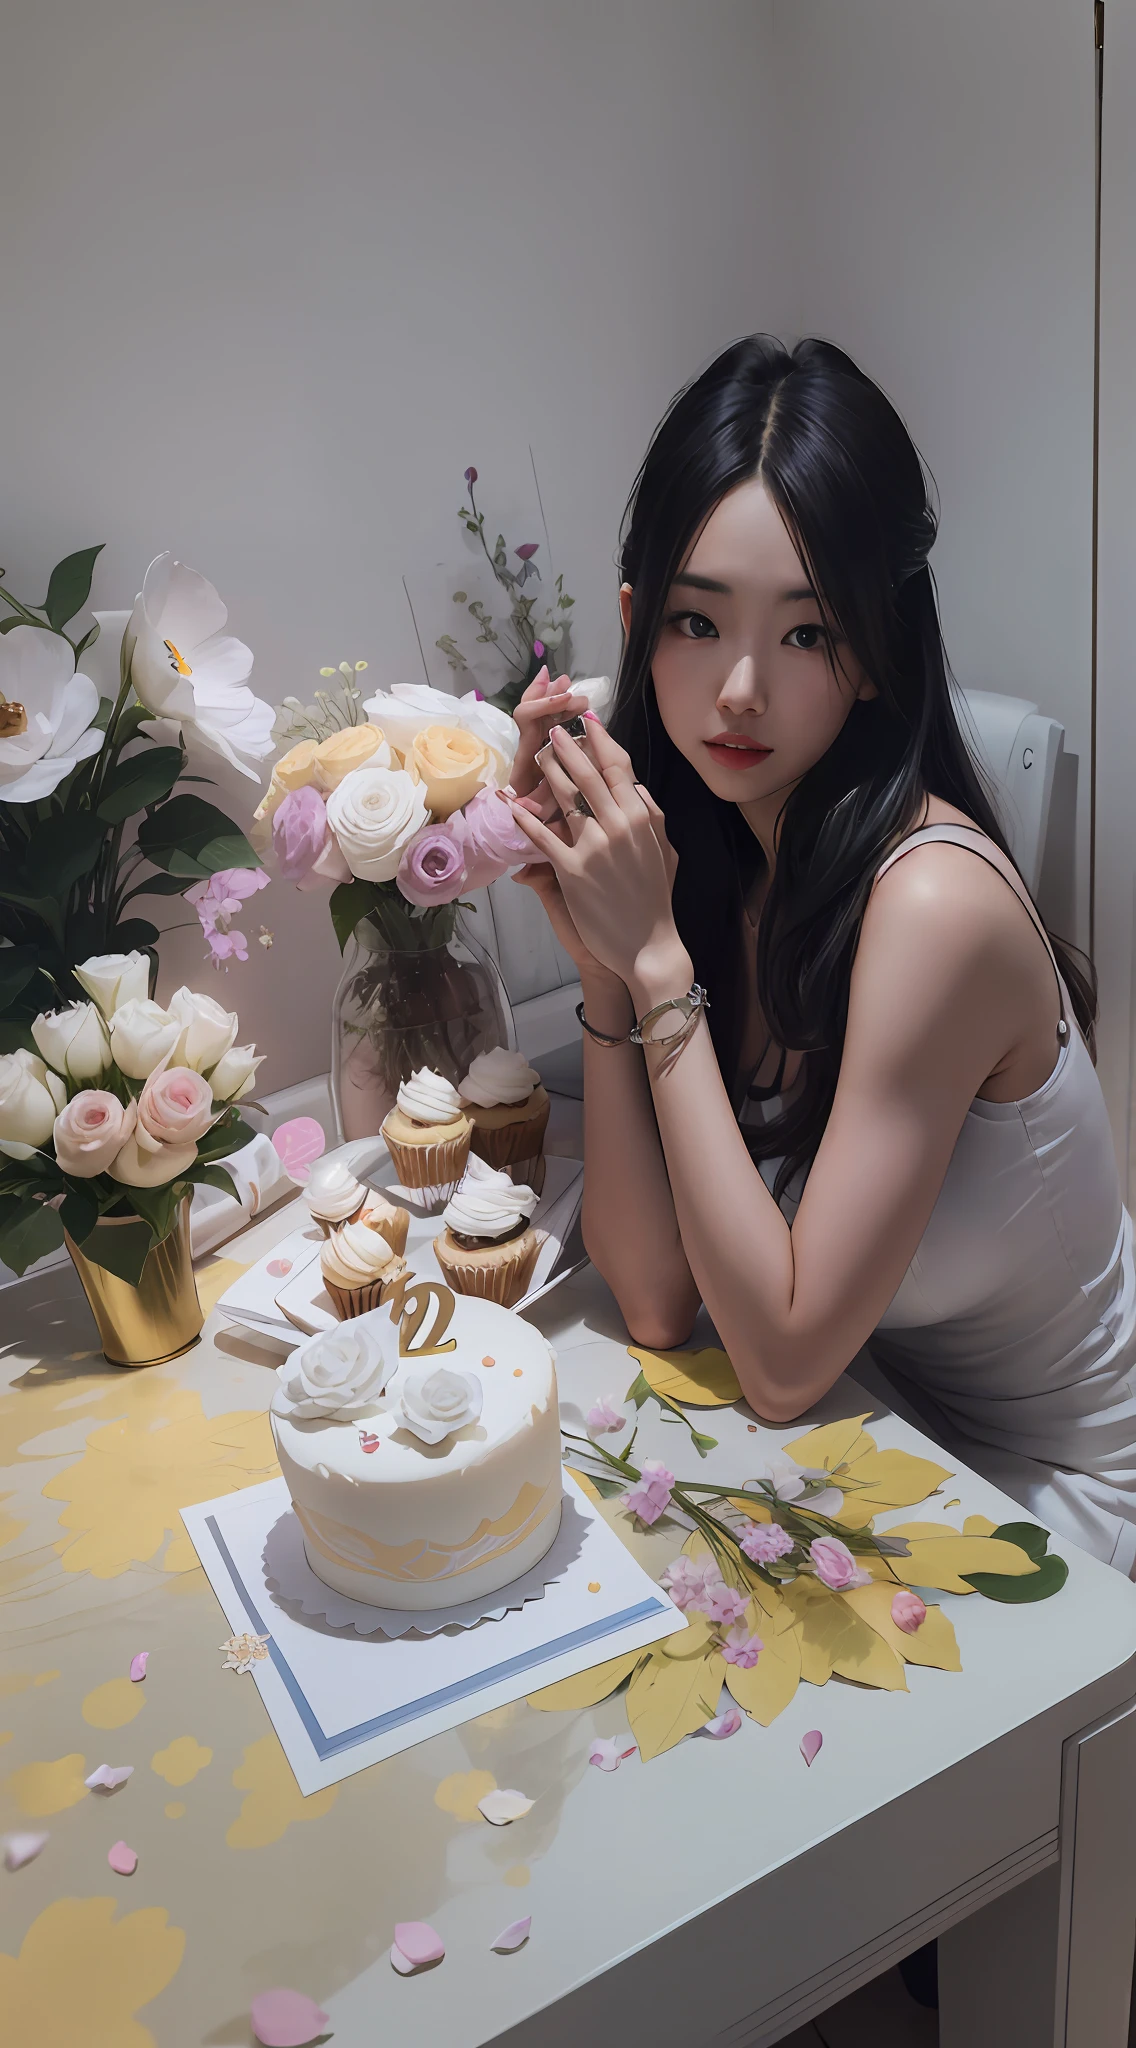 There was a woman sitting at the table，Holding cake and cupcakes, wenfei ye, Range Murata and Artgerm, taken with canon eos 5 d mark iv, Photo taken with Nikon D 7 5 0, Photo taken with Nikon D750, lulu chen, Zhang Jingna, Ruan Jia and Artgerm, author：ayami kojima